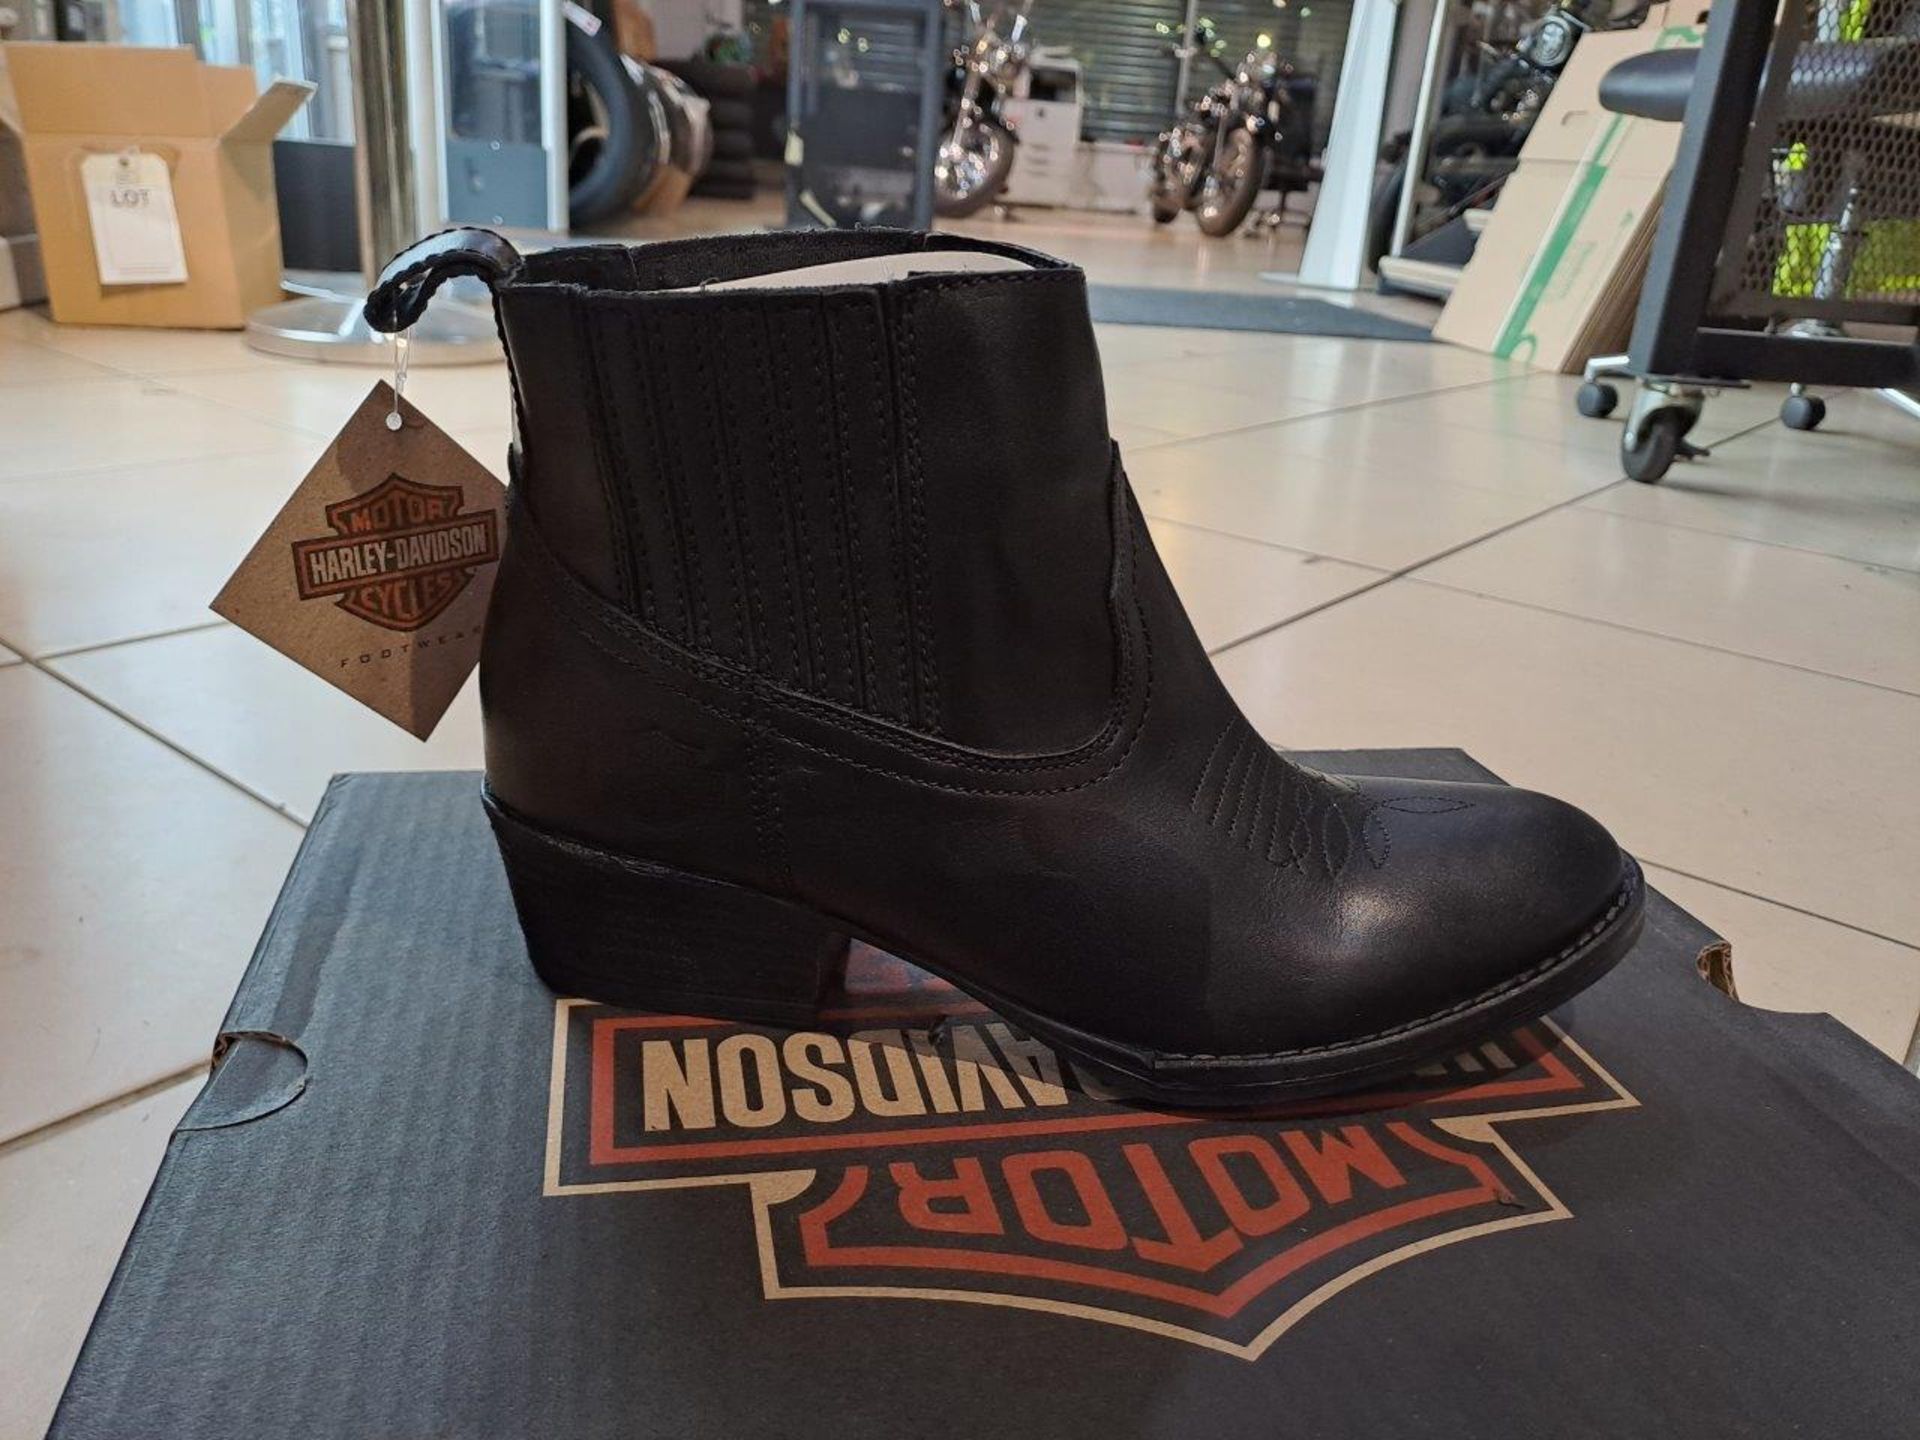 Harley Davidson Curwood Size 7 Womens Boots - Image 2 of 8